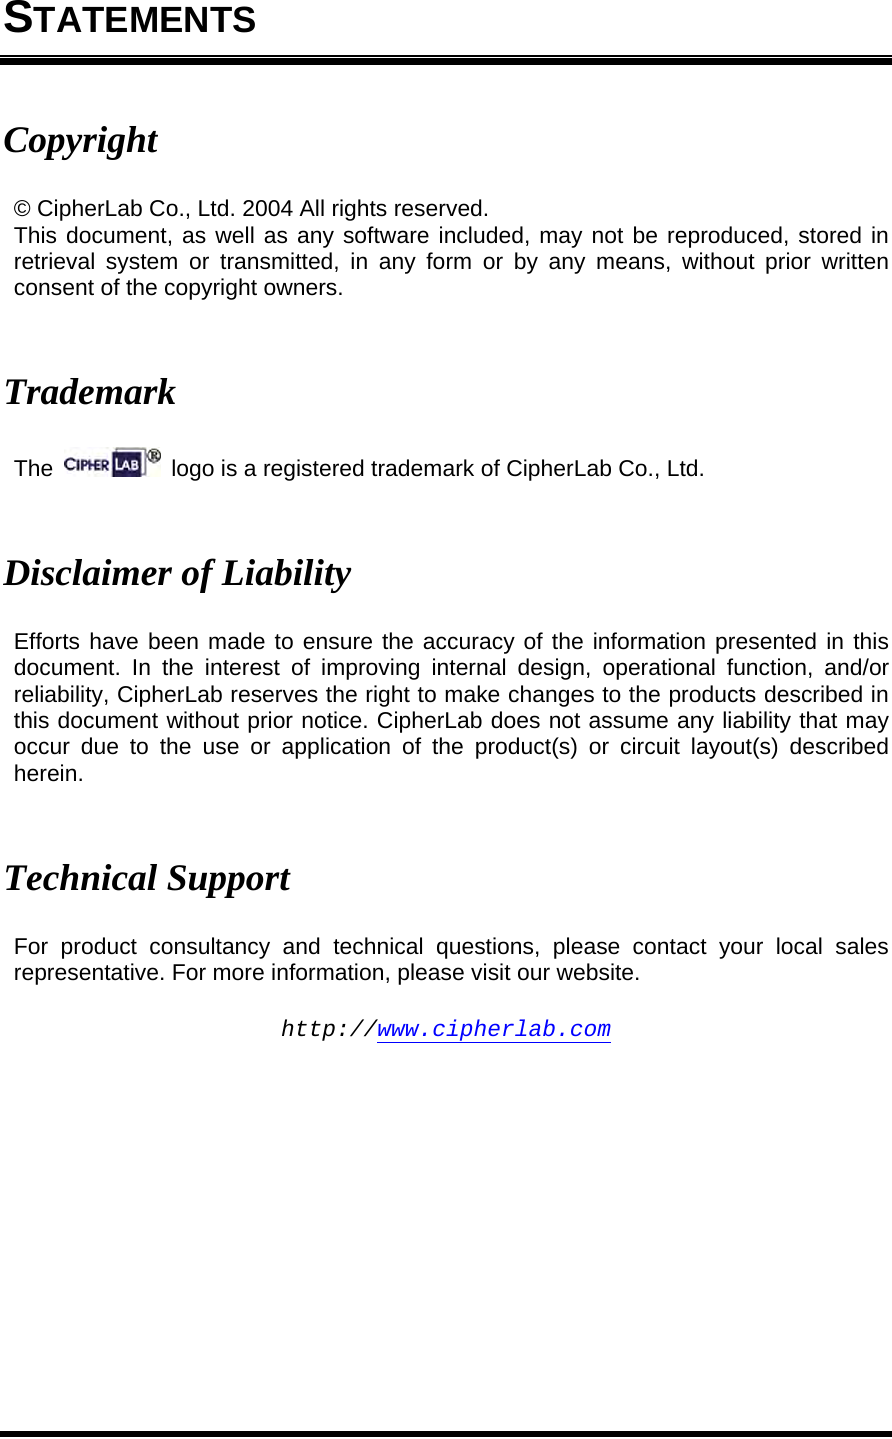  STATEMENTS Copyright © CipherLab Co., Ltd. 2004 All rights reserved. This document, as well as any software included, may not be reproduced, stored in retrieval system or transmitted, in any form or by any means, without prior written consent of the copyright owners.   Trademark The    logo is a registered trademark of CipherLab Co., Ltd.   Disclaimer of Liability Efforts have been made to ensure the accuracy of the information presented in this document. In the interest of improving internal design, operational function, and/or reliability, CipherLab reserves the right to make changes to the products described in this document without prior notice. CipherLab does not assume any liability that may occur due to the use or application of the product(s) or circuit layout(s) described herein.   Technical Support For product consultancy and technical questions, please contact your local sales representative. For more information, please visit our website.  http://www.cipherlab.com 